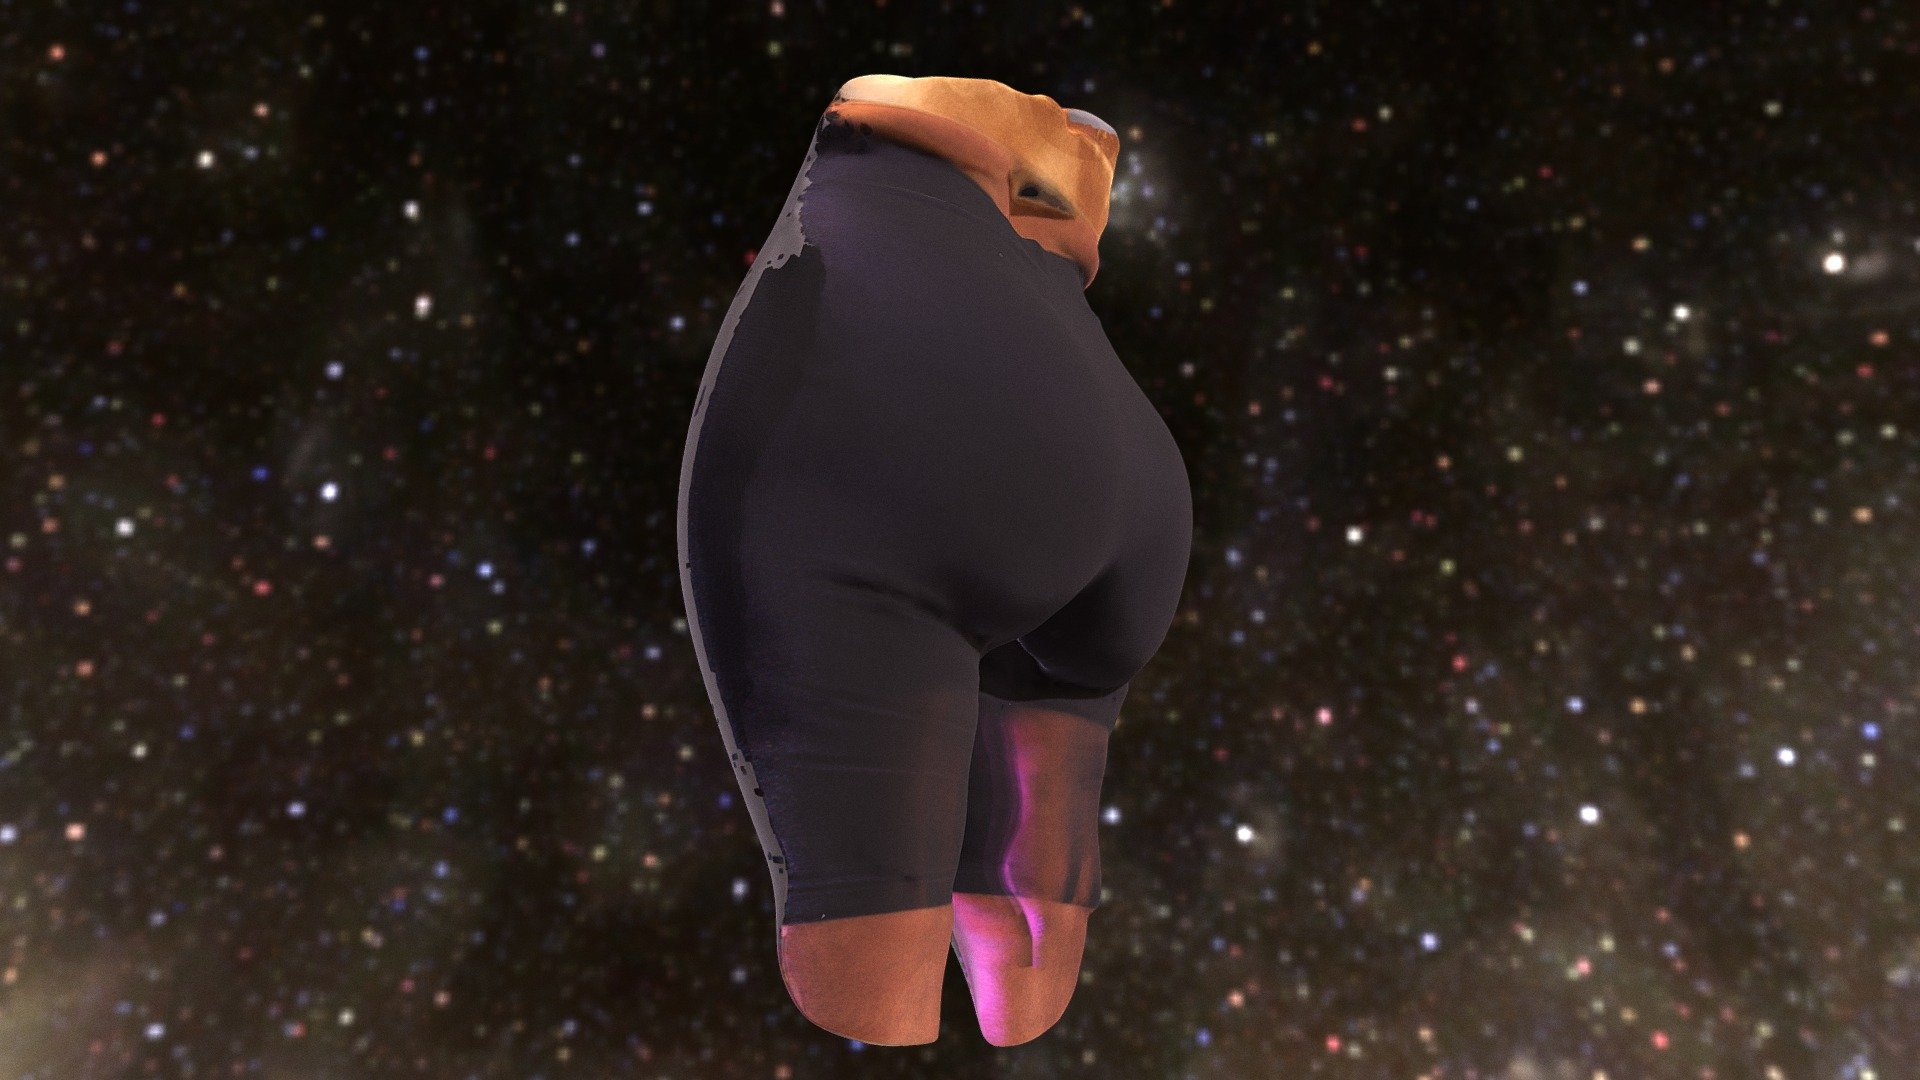 Lovable Booty Download Free 3d Model By Aanticomplacency C925f53 Sketchfab 